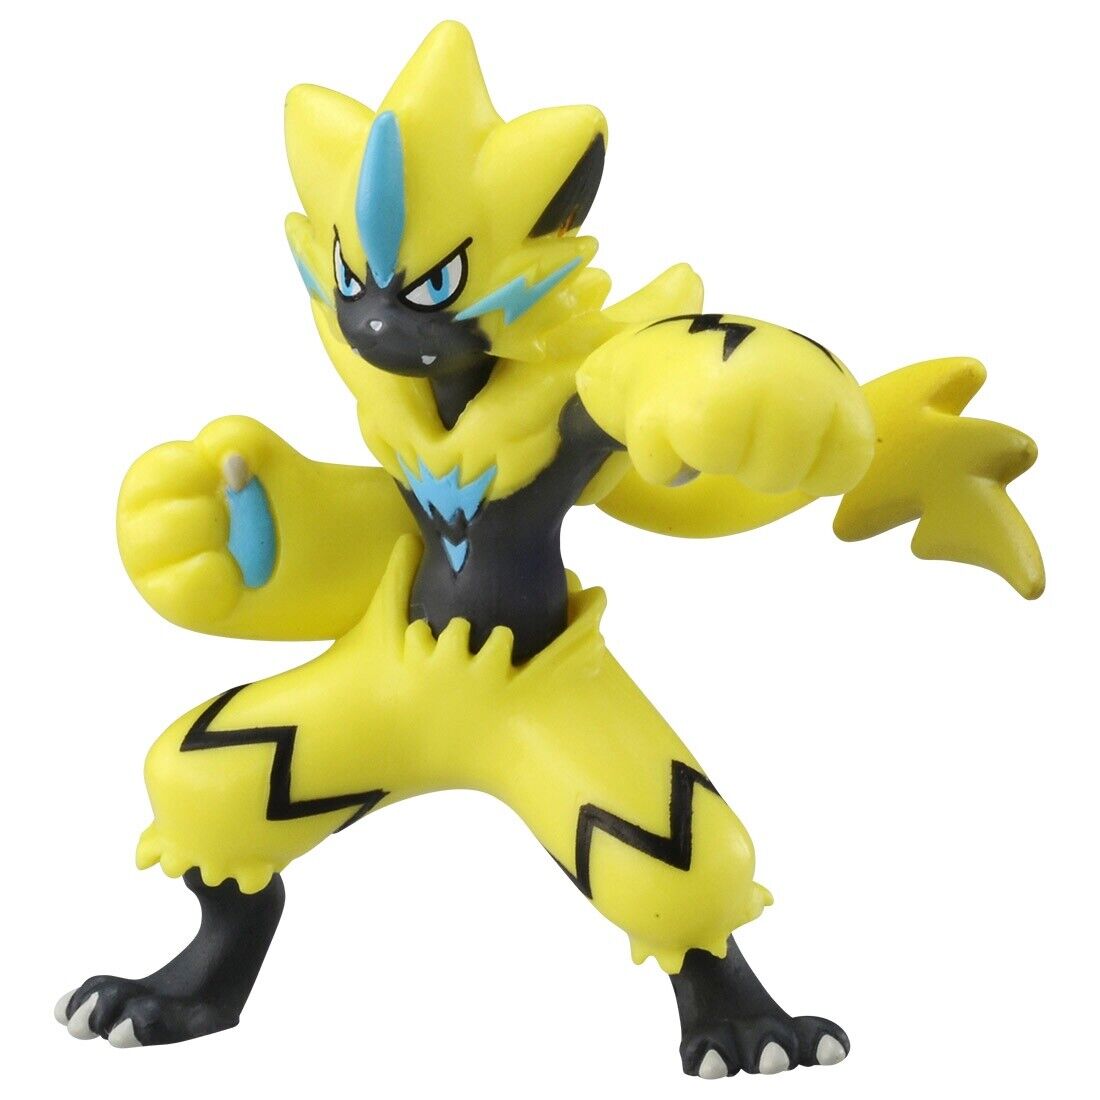 Pokemon Moncolle Takara Tomy Figures -- Pick from Several Kinds Japanese Imports